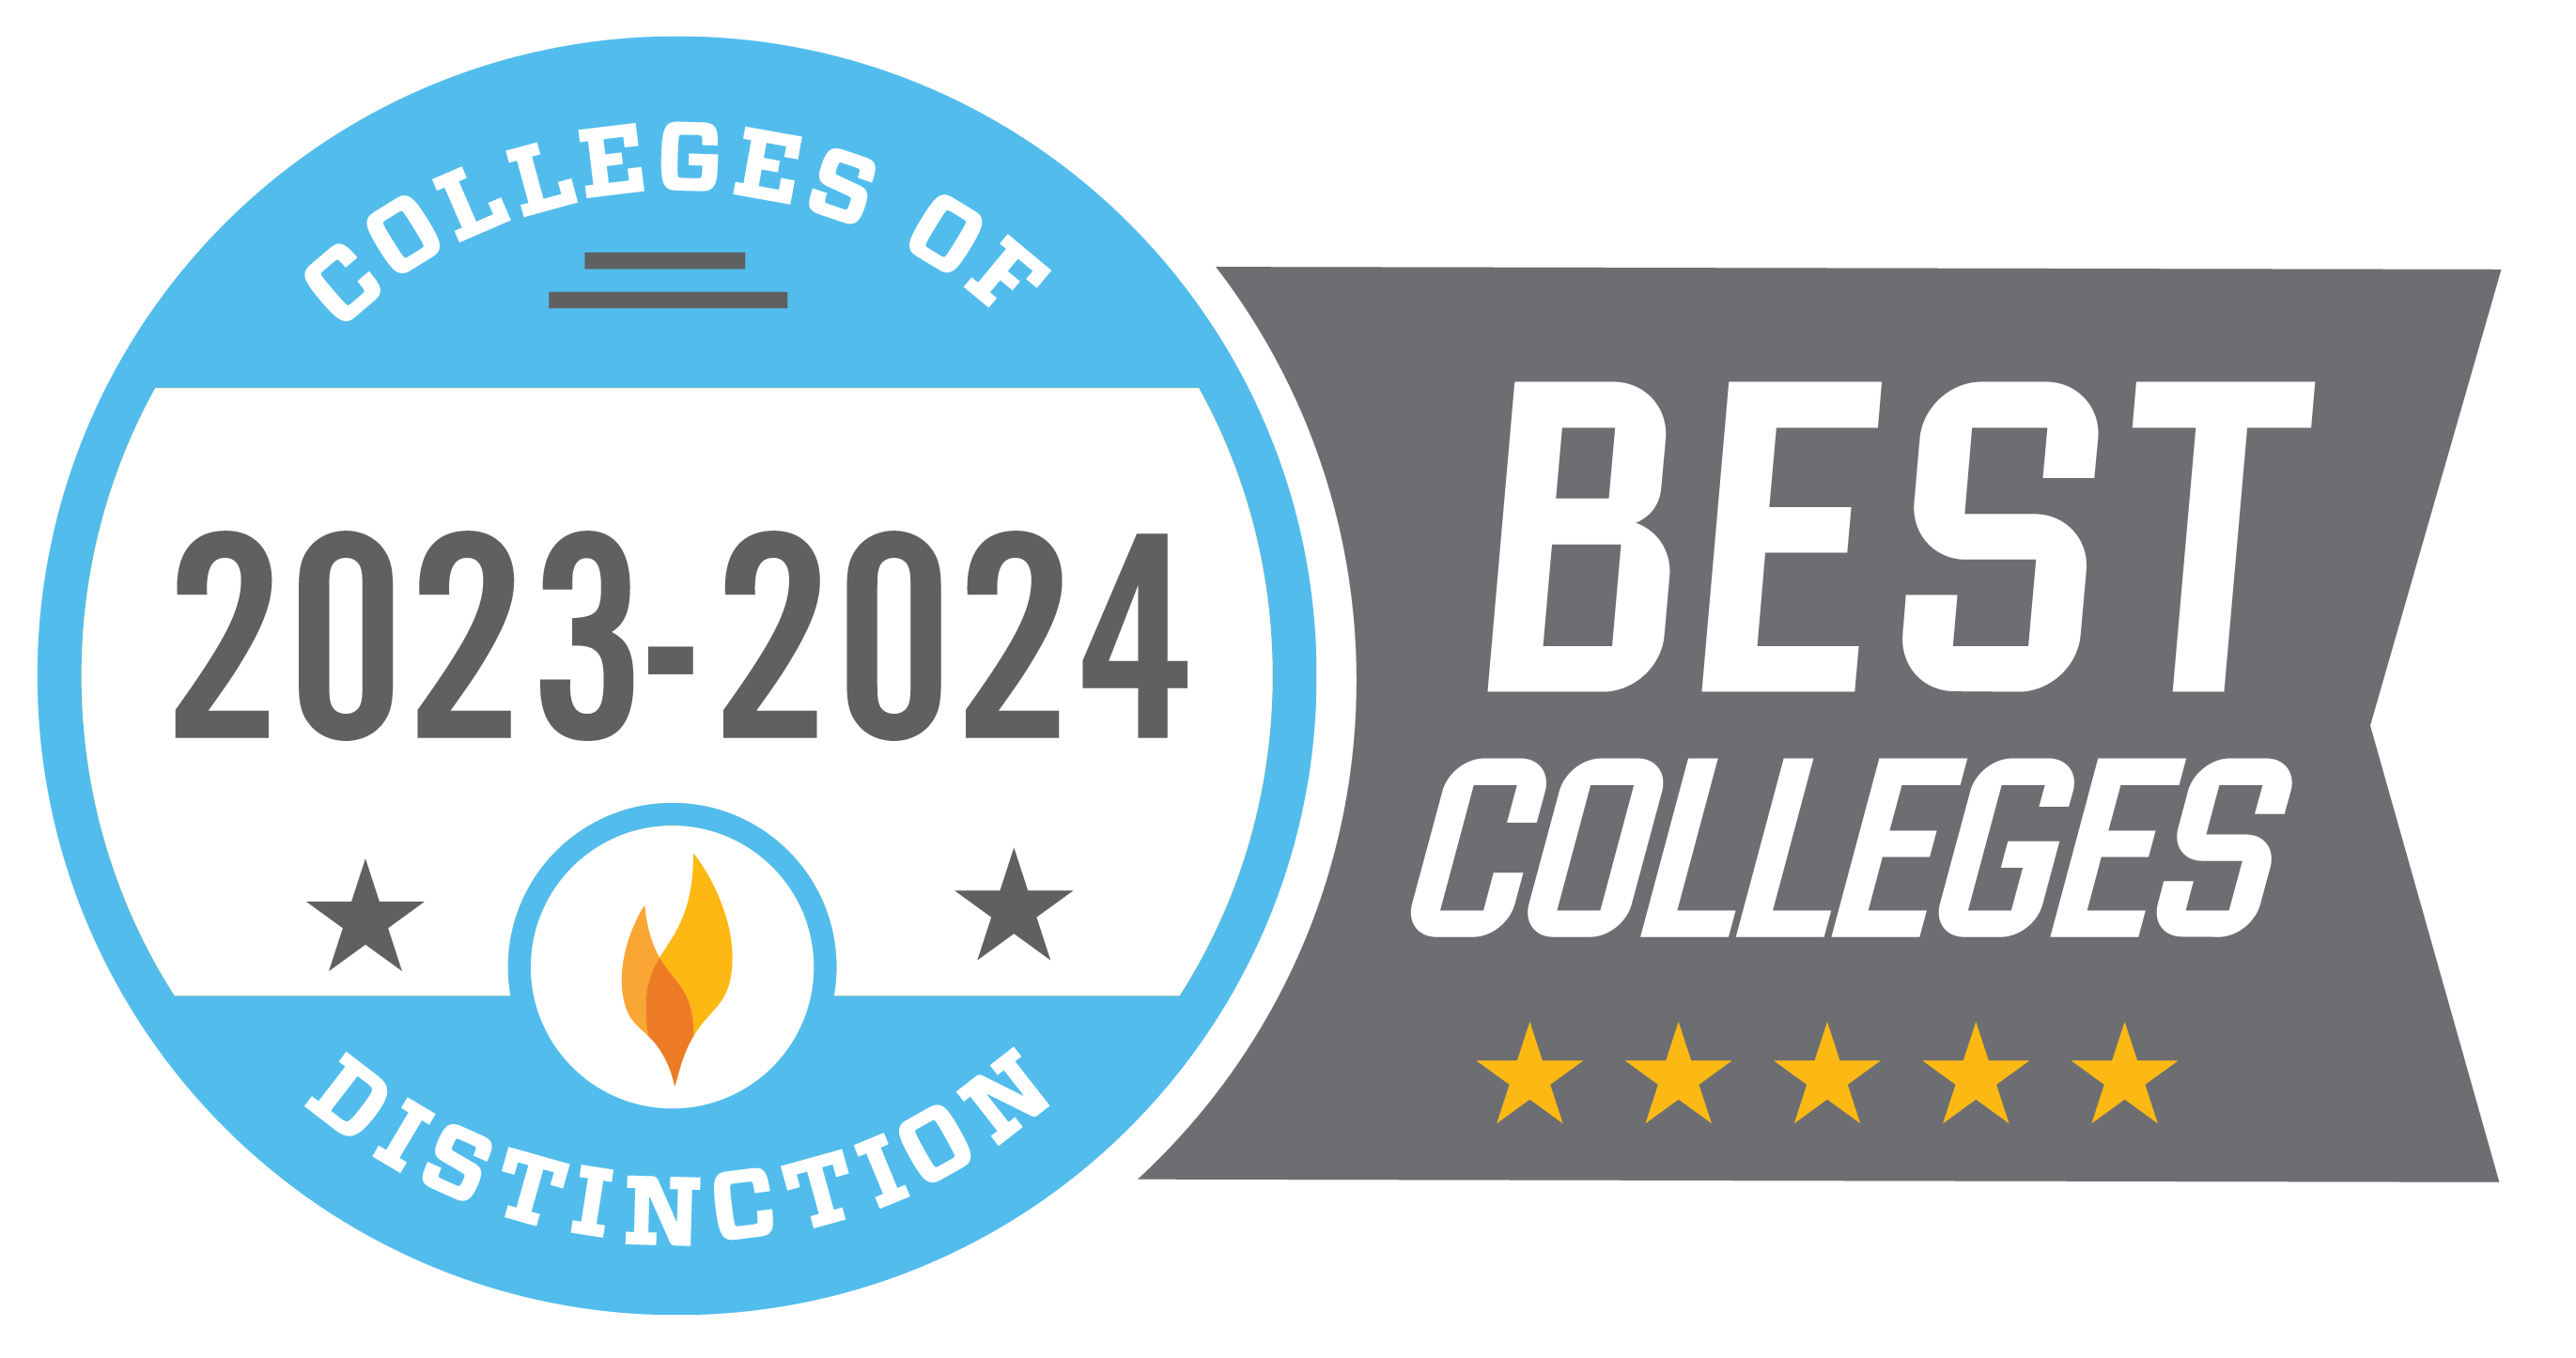 Colleges of Distinction badge